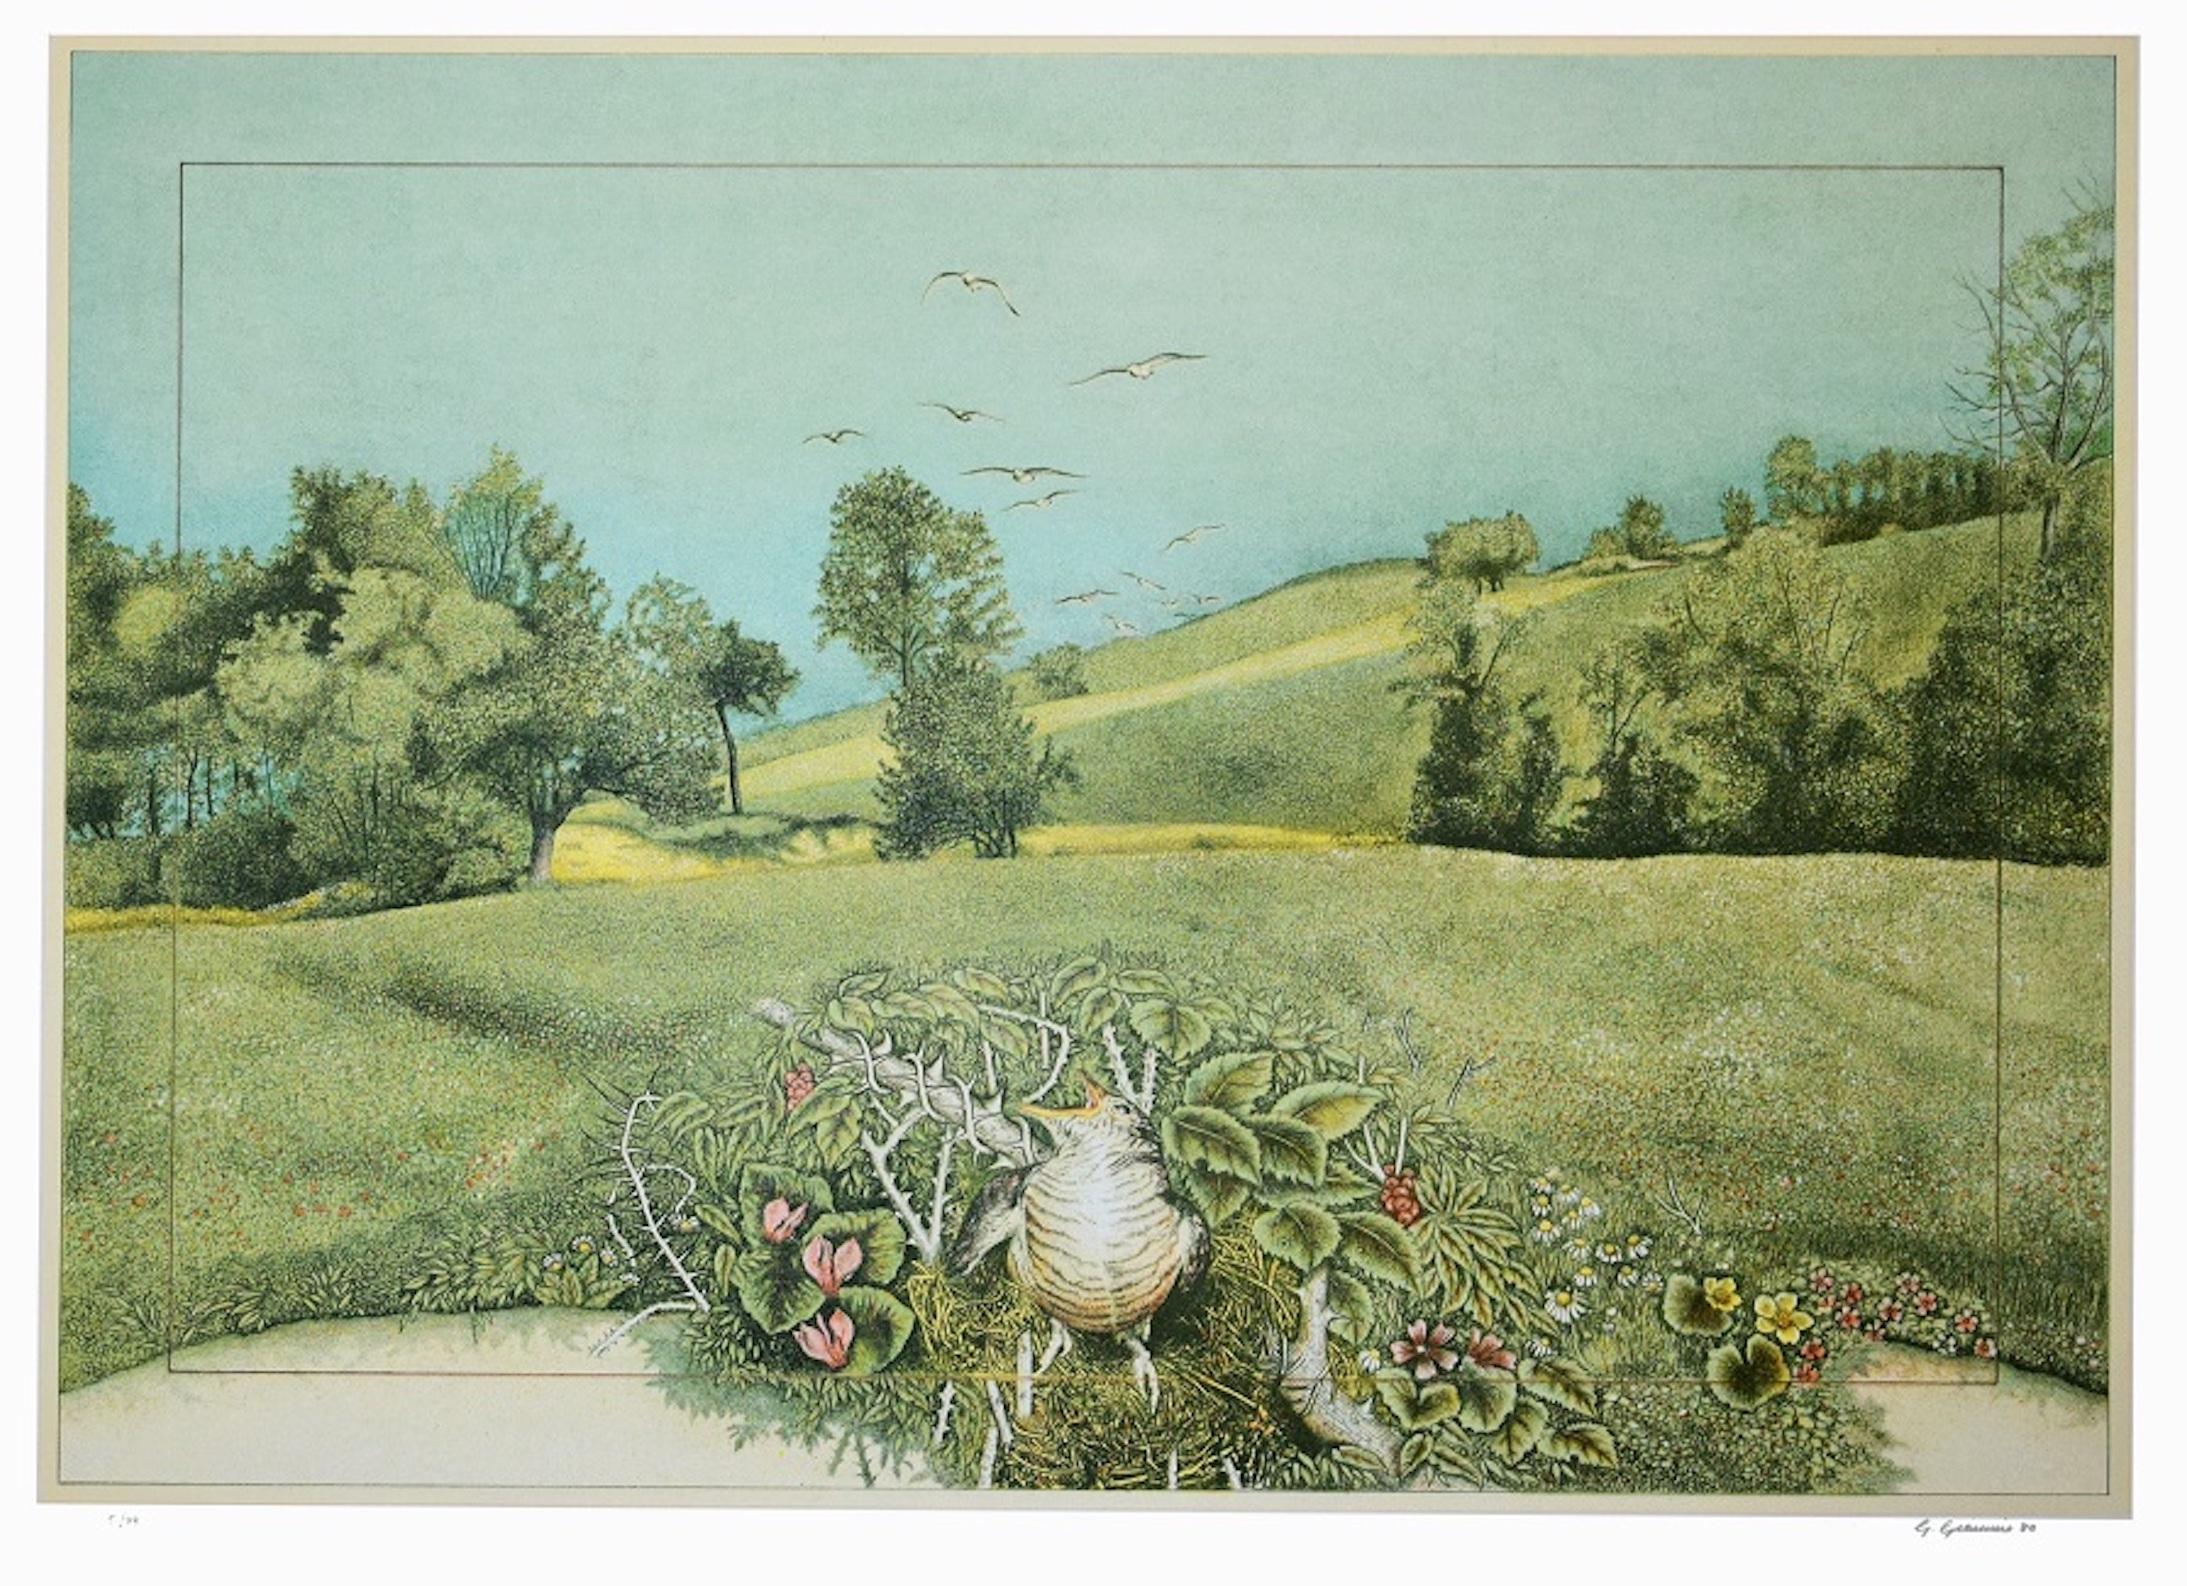 Natural Oasis - Lithograph on Silver Paper by G. Giannini - 1980